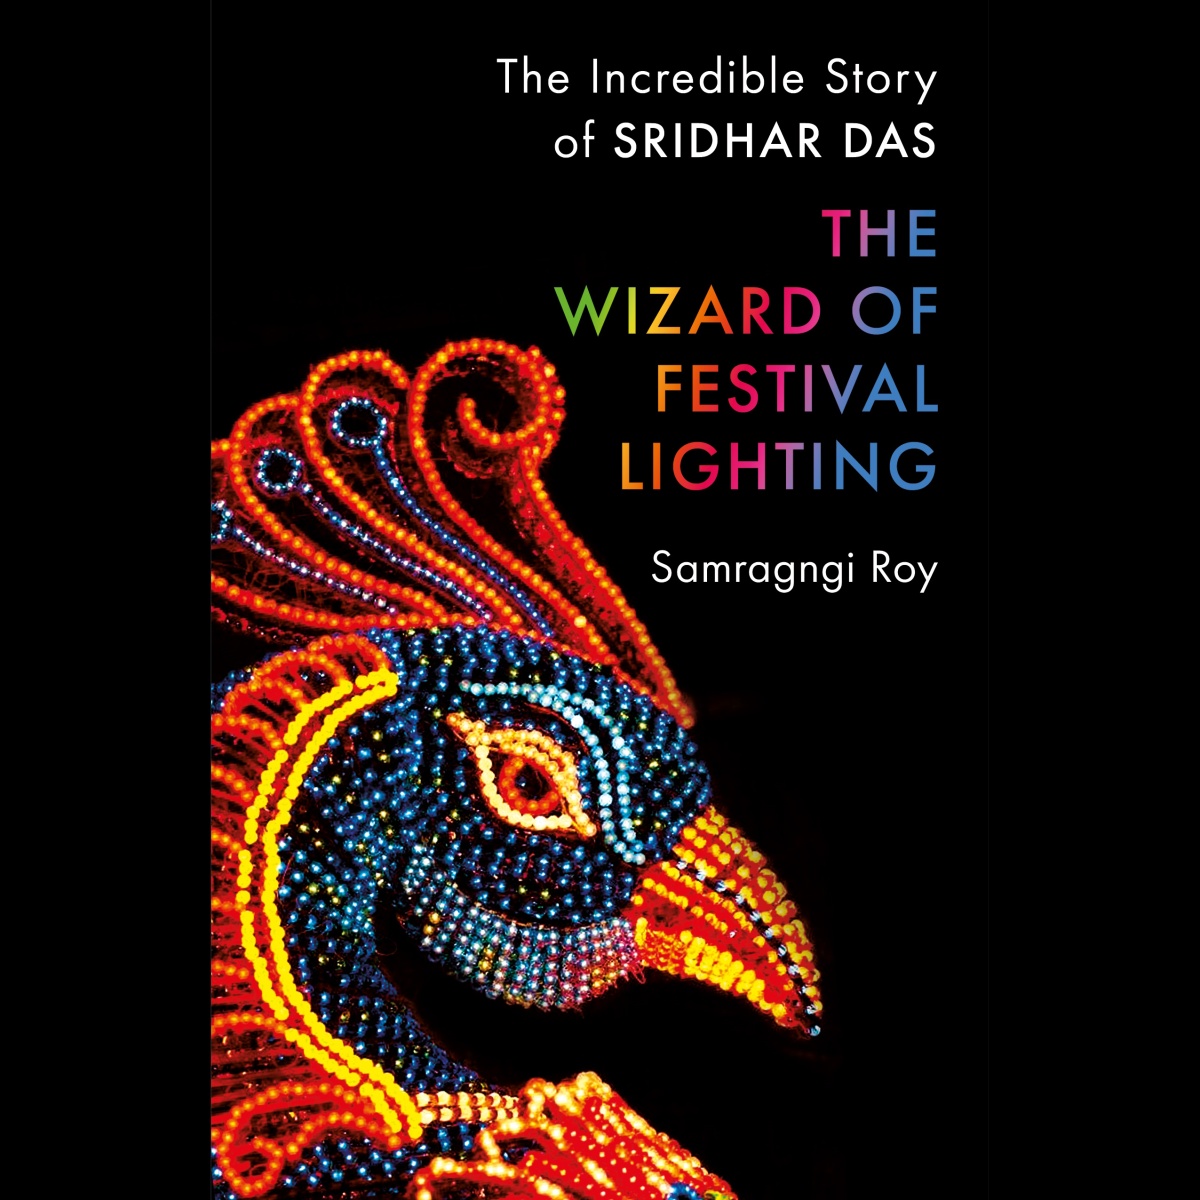 Book Excerpt: The Wizard of Festival Lighting – The Incredible Story of Sridhar Das